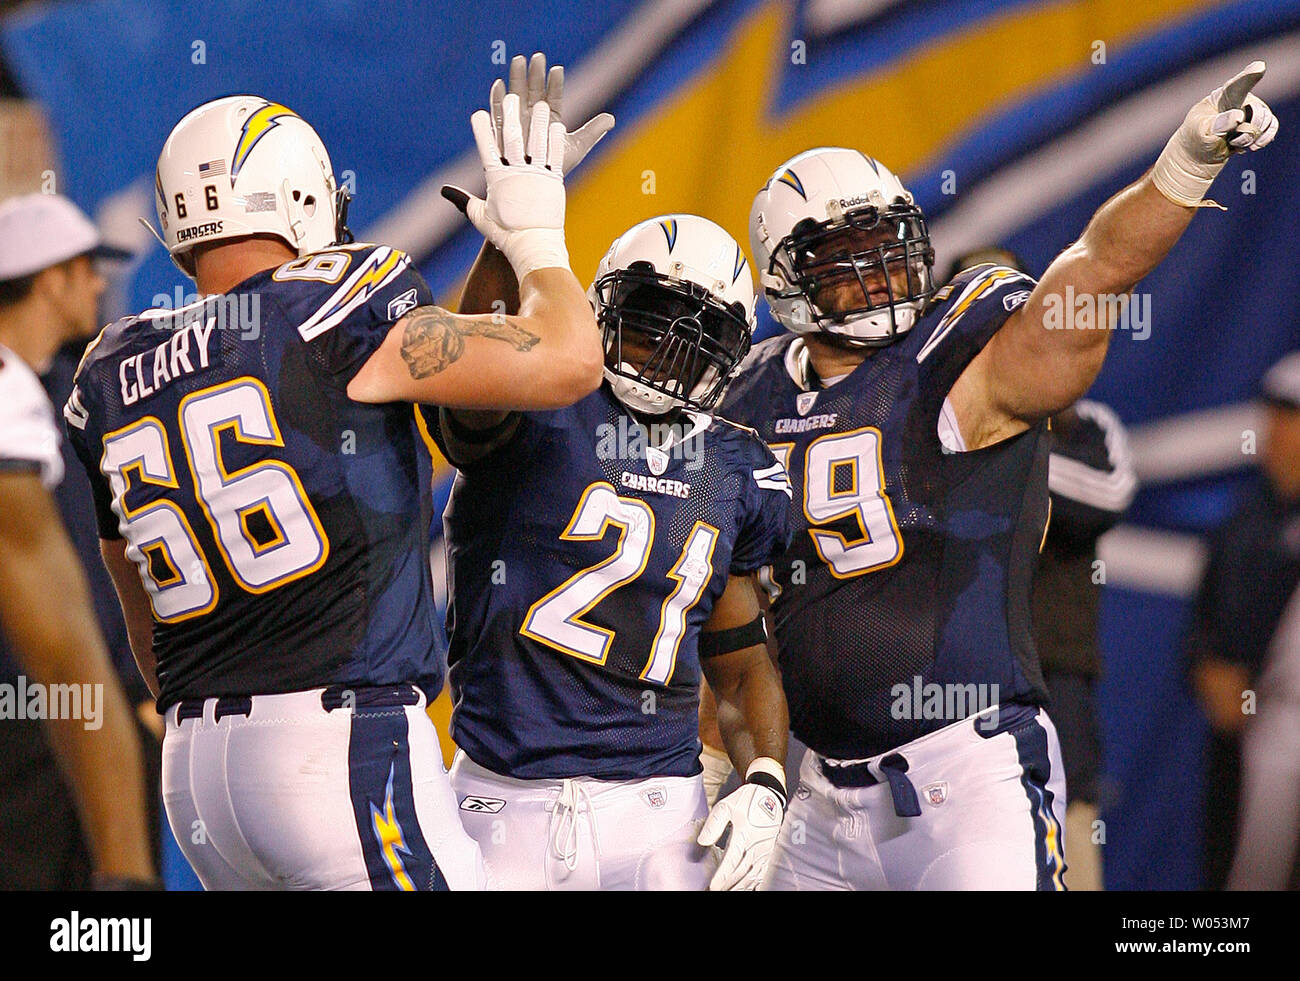 San Diego Chargers runningback LaDainian Tomlinson (center) is congratulated by tackle Jeromey Clary (left) and guard Mike Goff (right) after scoring a touchdown in the first quarter against the Denver Broncos at Qualcomm Stadium in San Diego on December 24, 2007. (UPI Photo/Robert Benson) Stock Photo